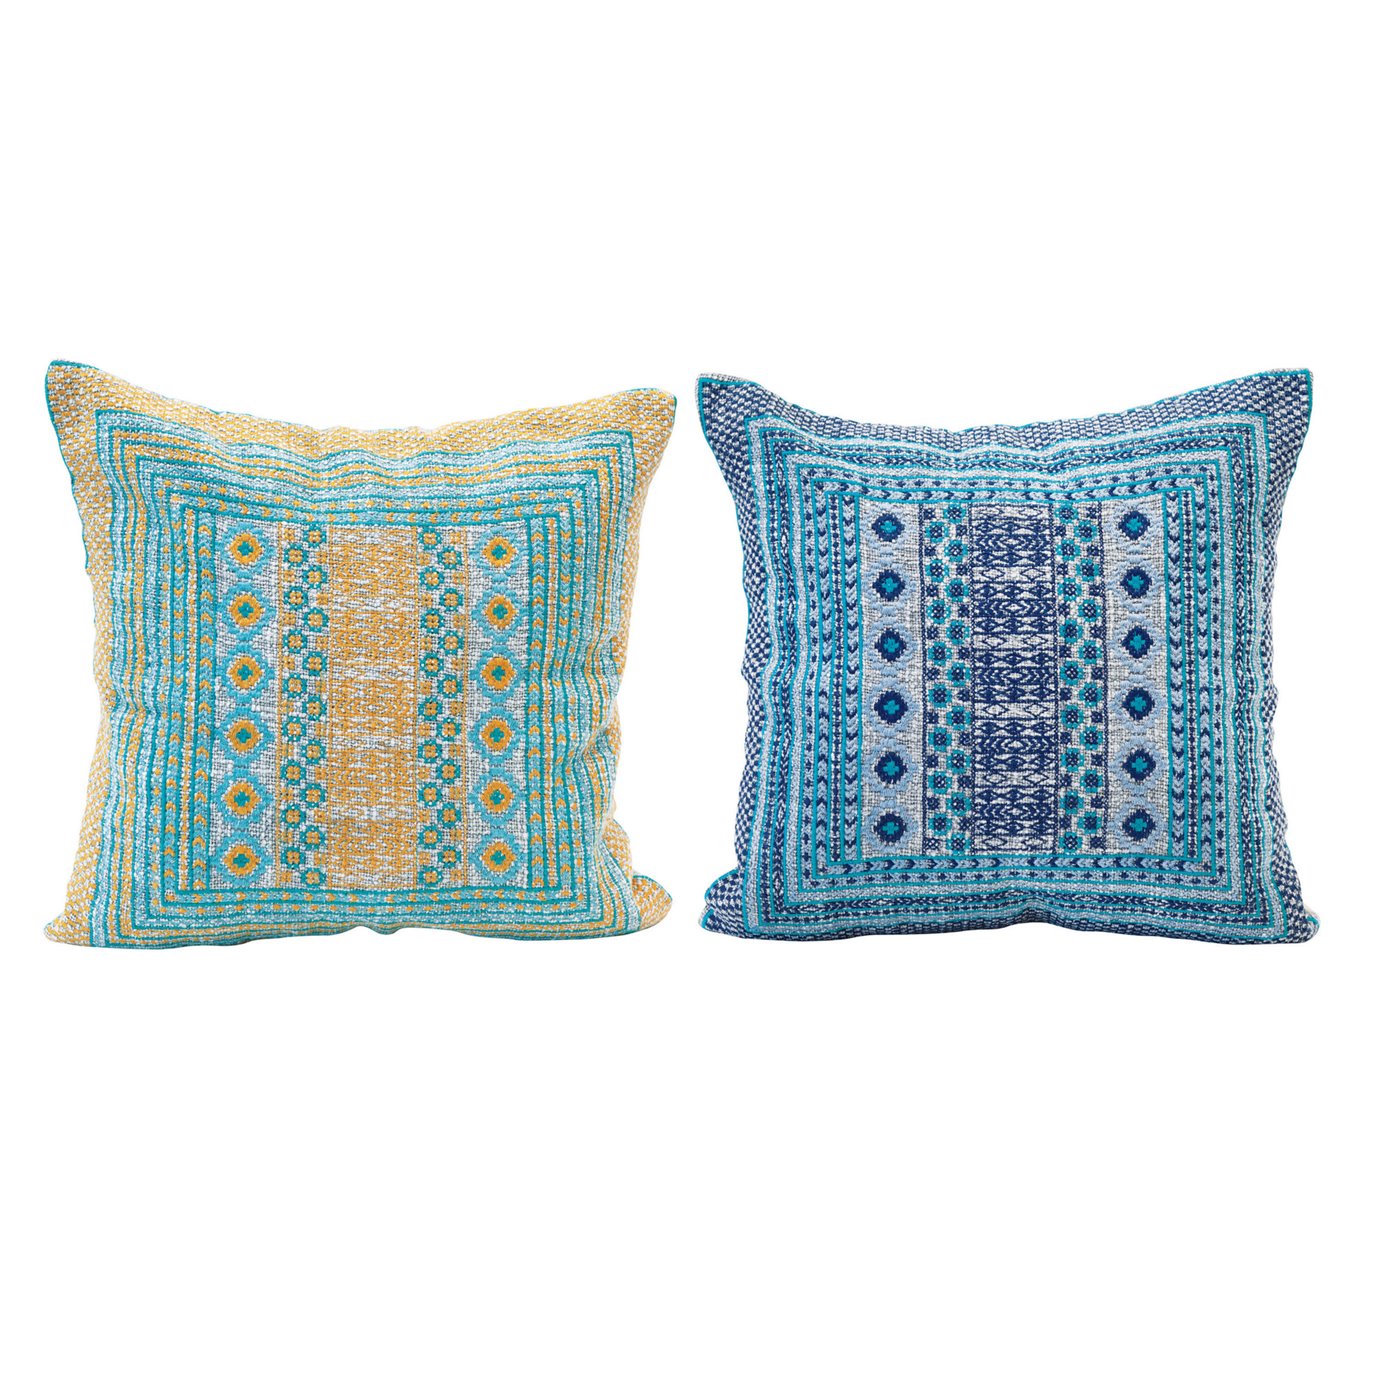 16" Square Woven Cotton Embroidered Pillow, 2 Colors